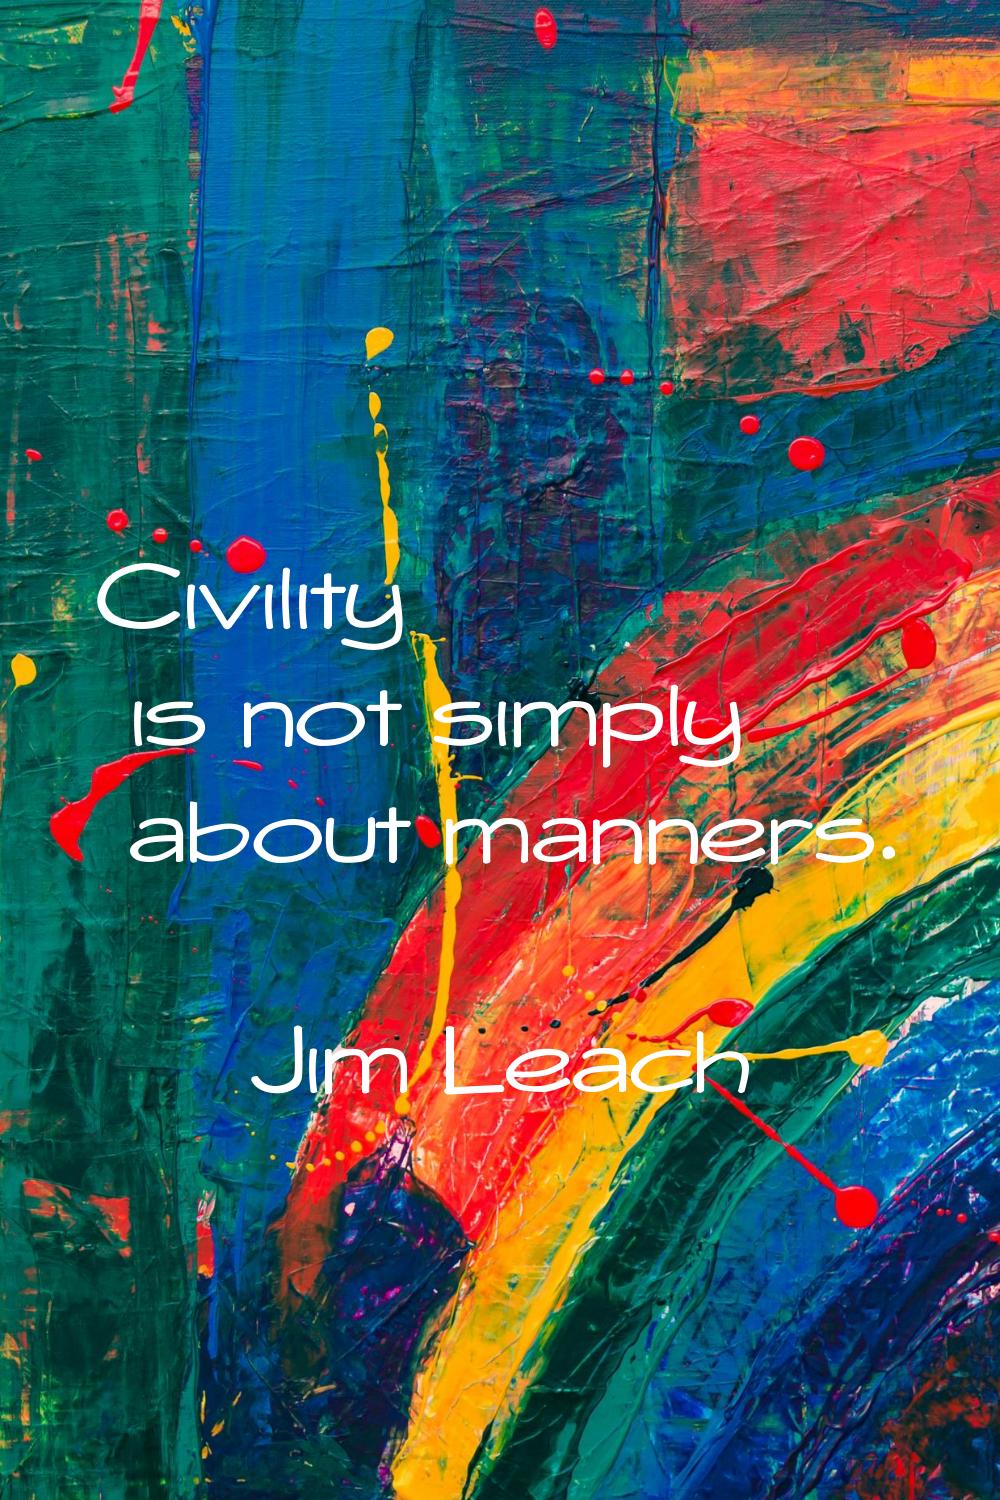 Civility is not simply about manners.